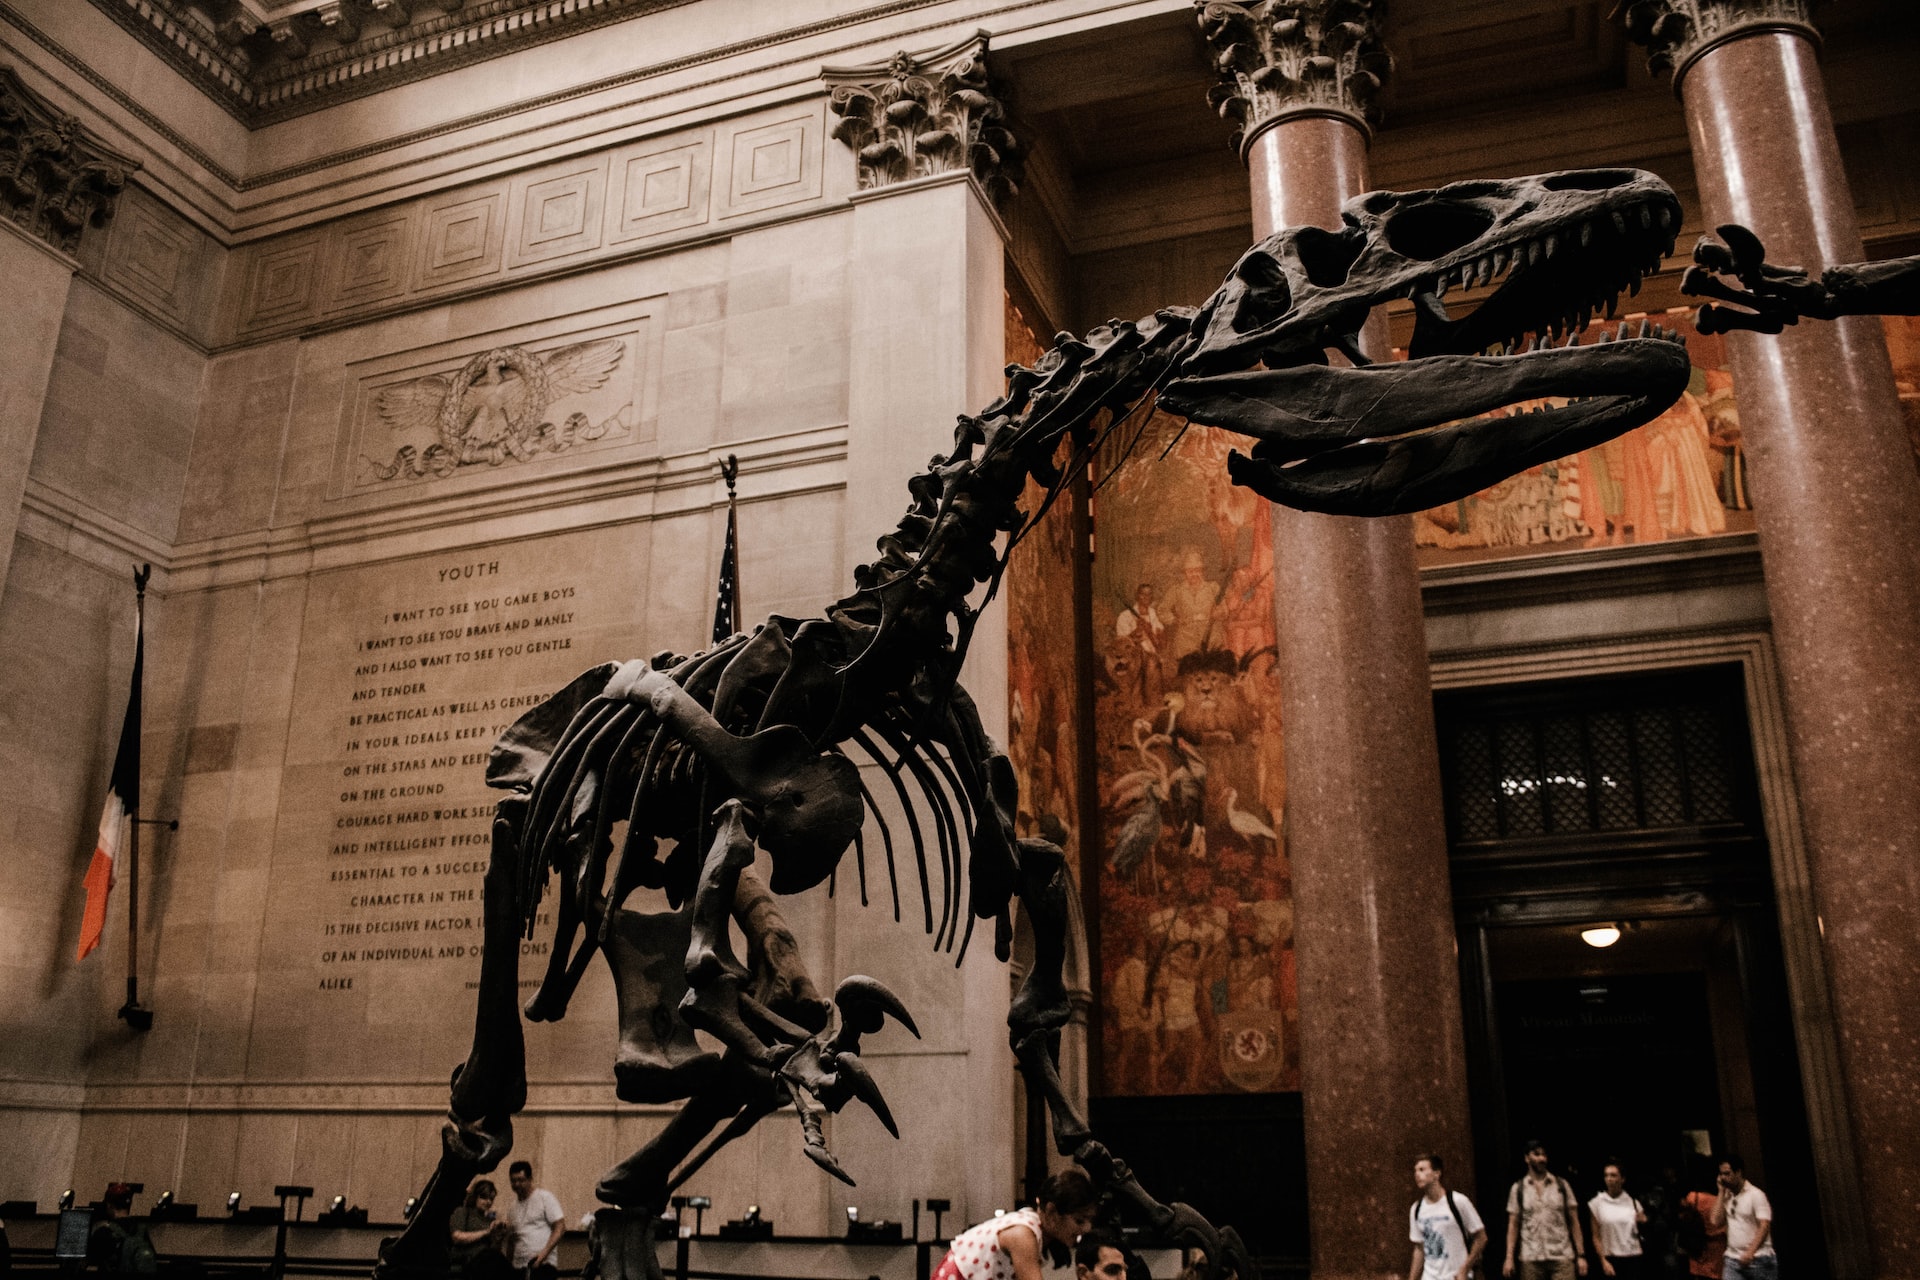 A dinosaur's skeleton in the American Museum of Natural History.